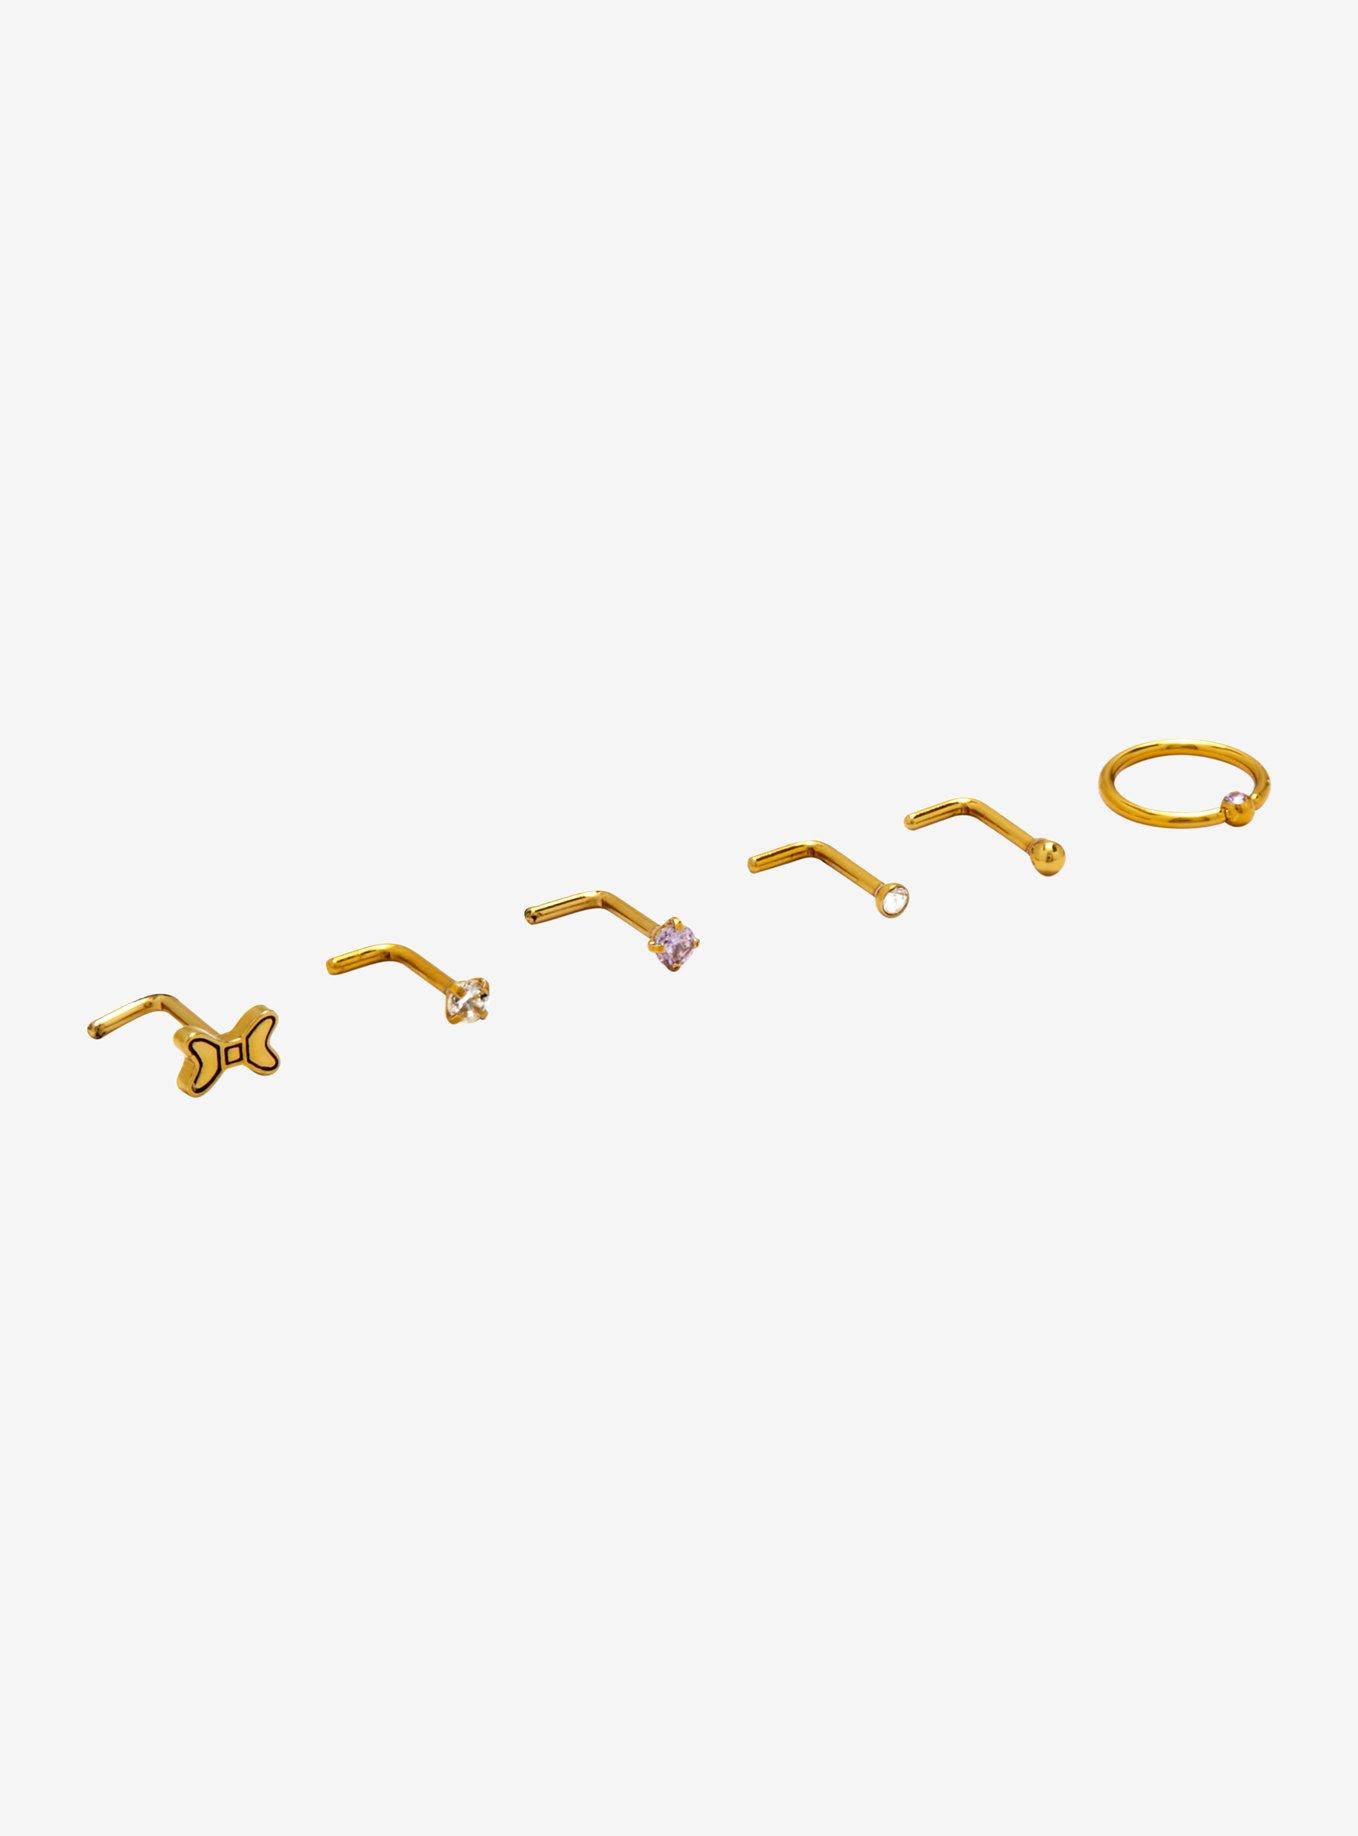 Steel Gold Tone With CZ Nose Stud & Hoop 6 Pack, , alternate